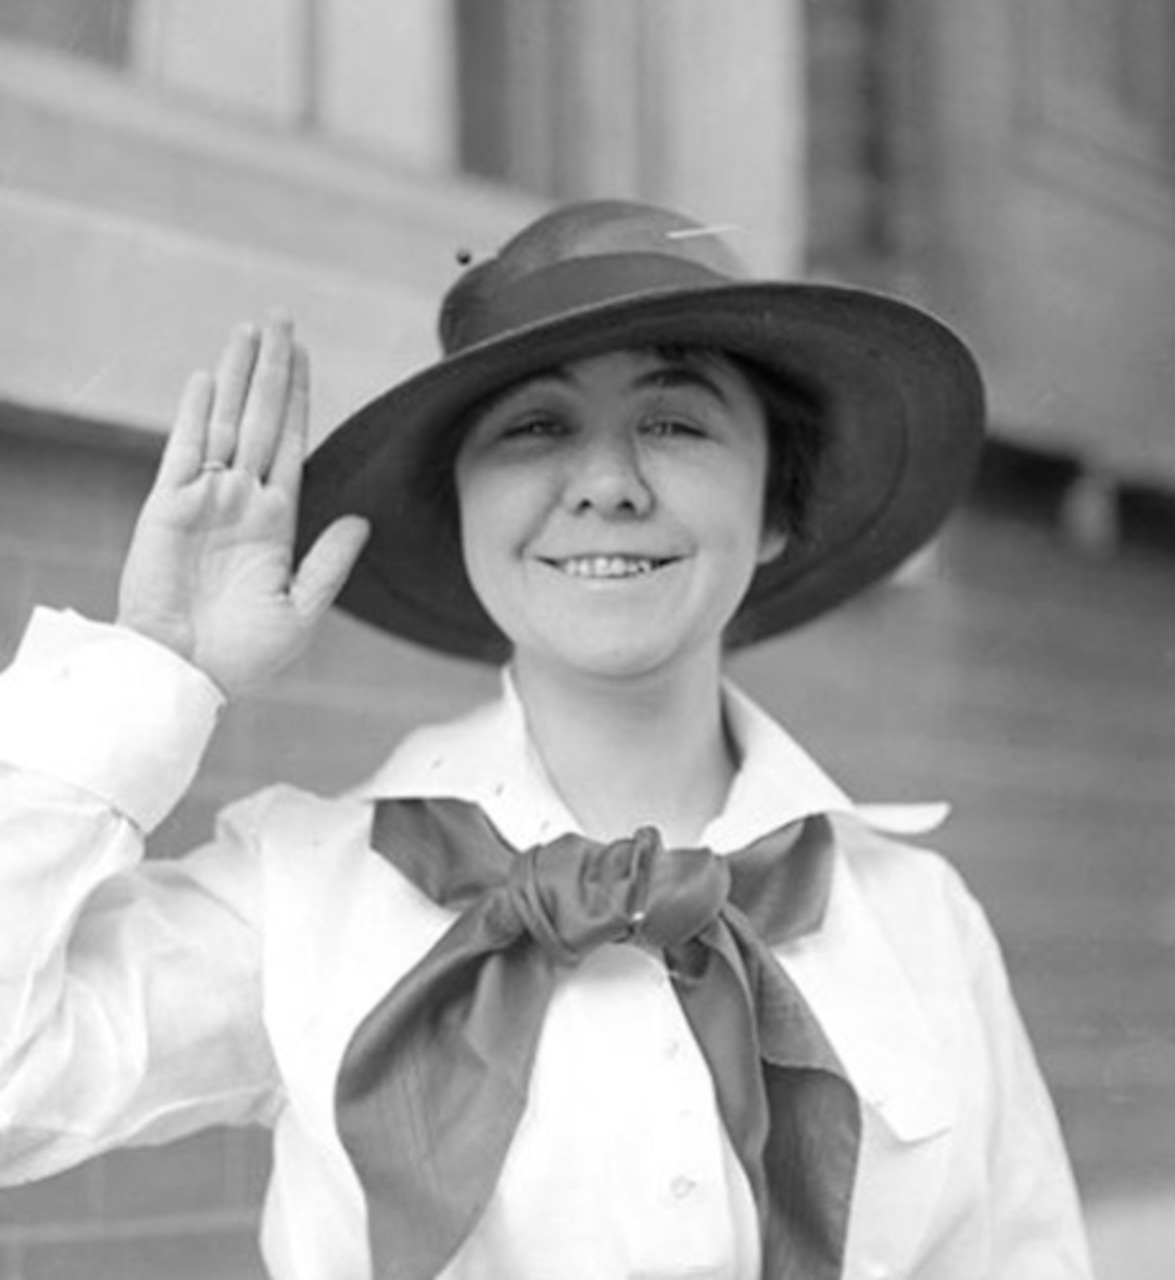 A woman waves for the camera.